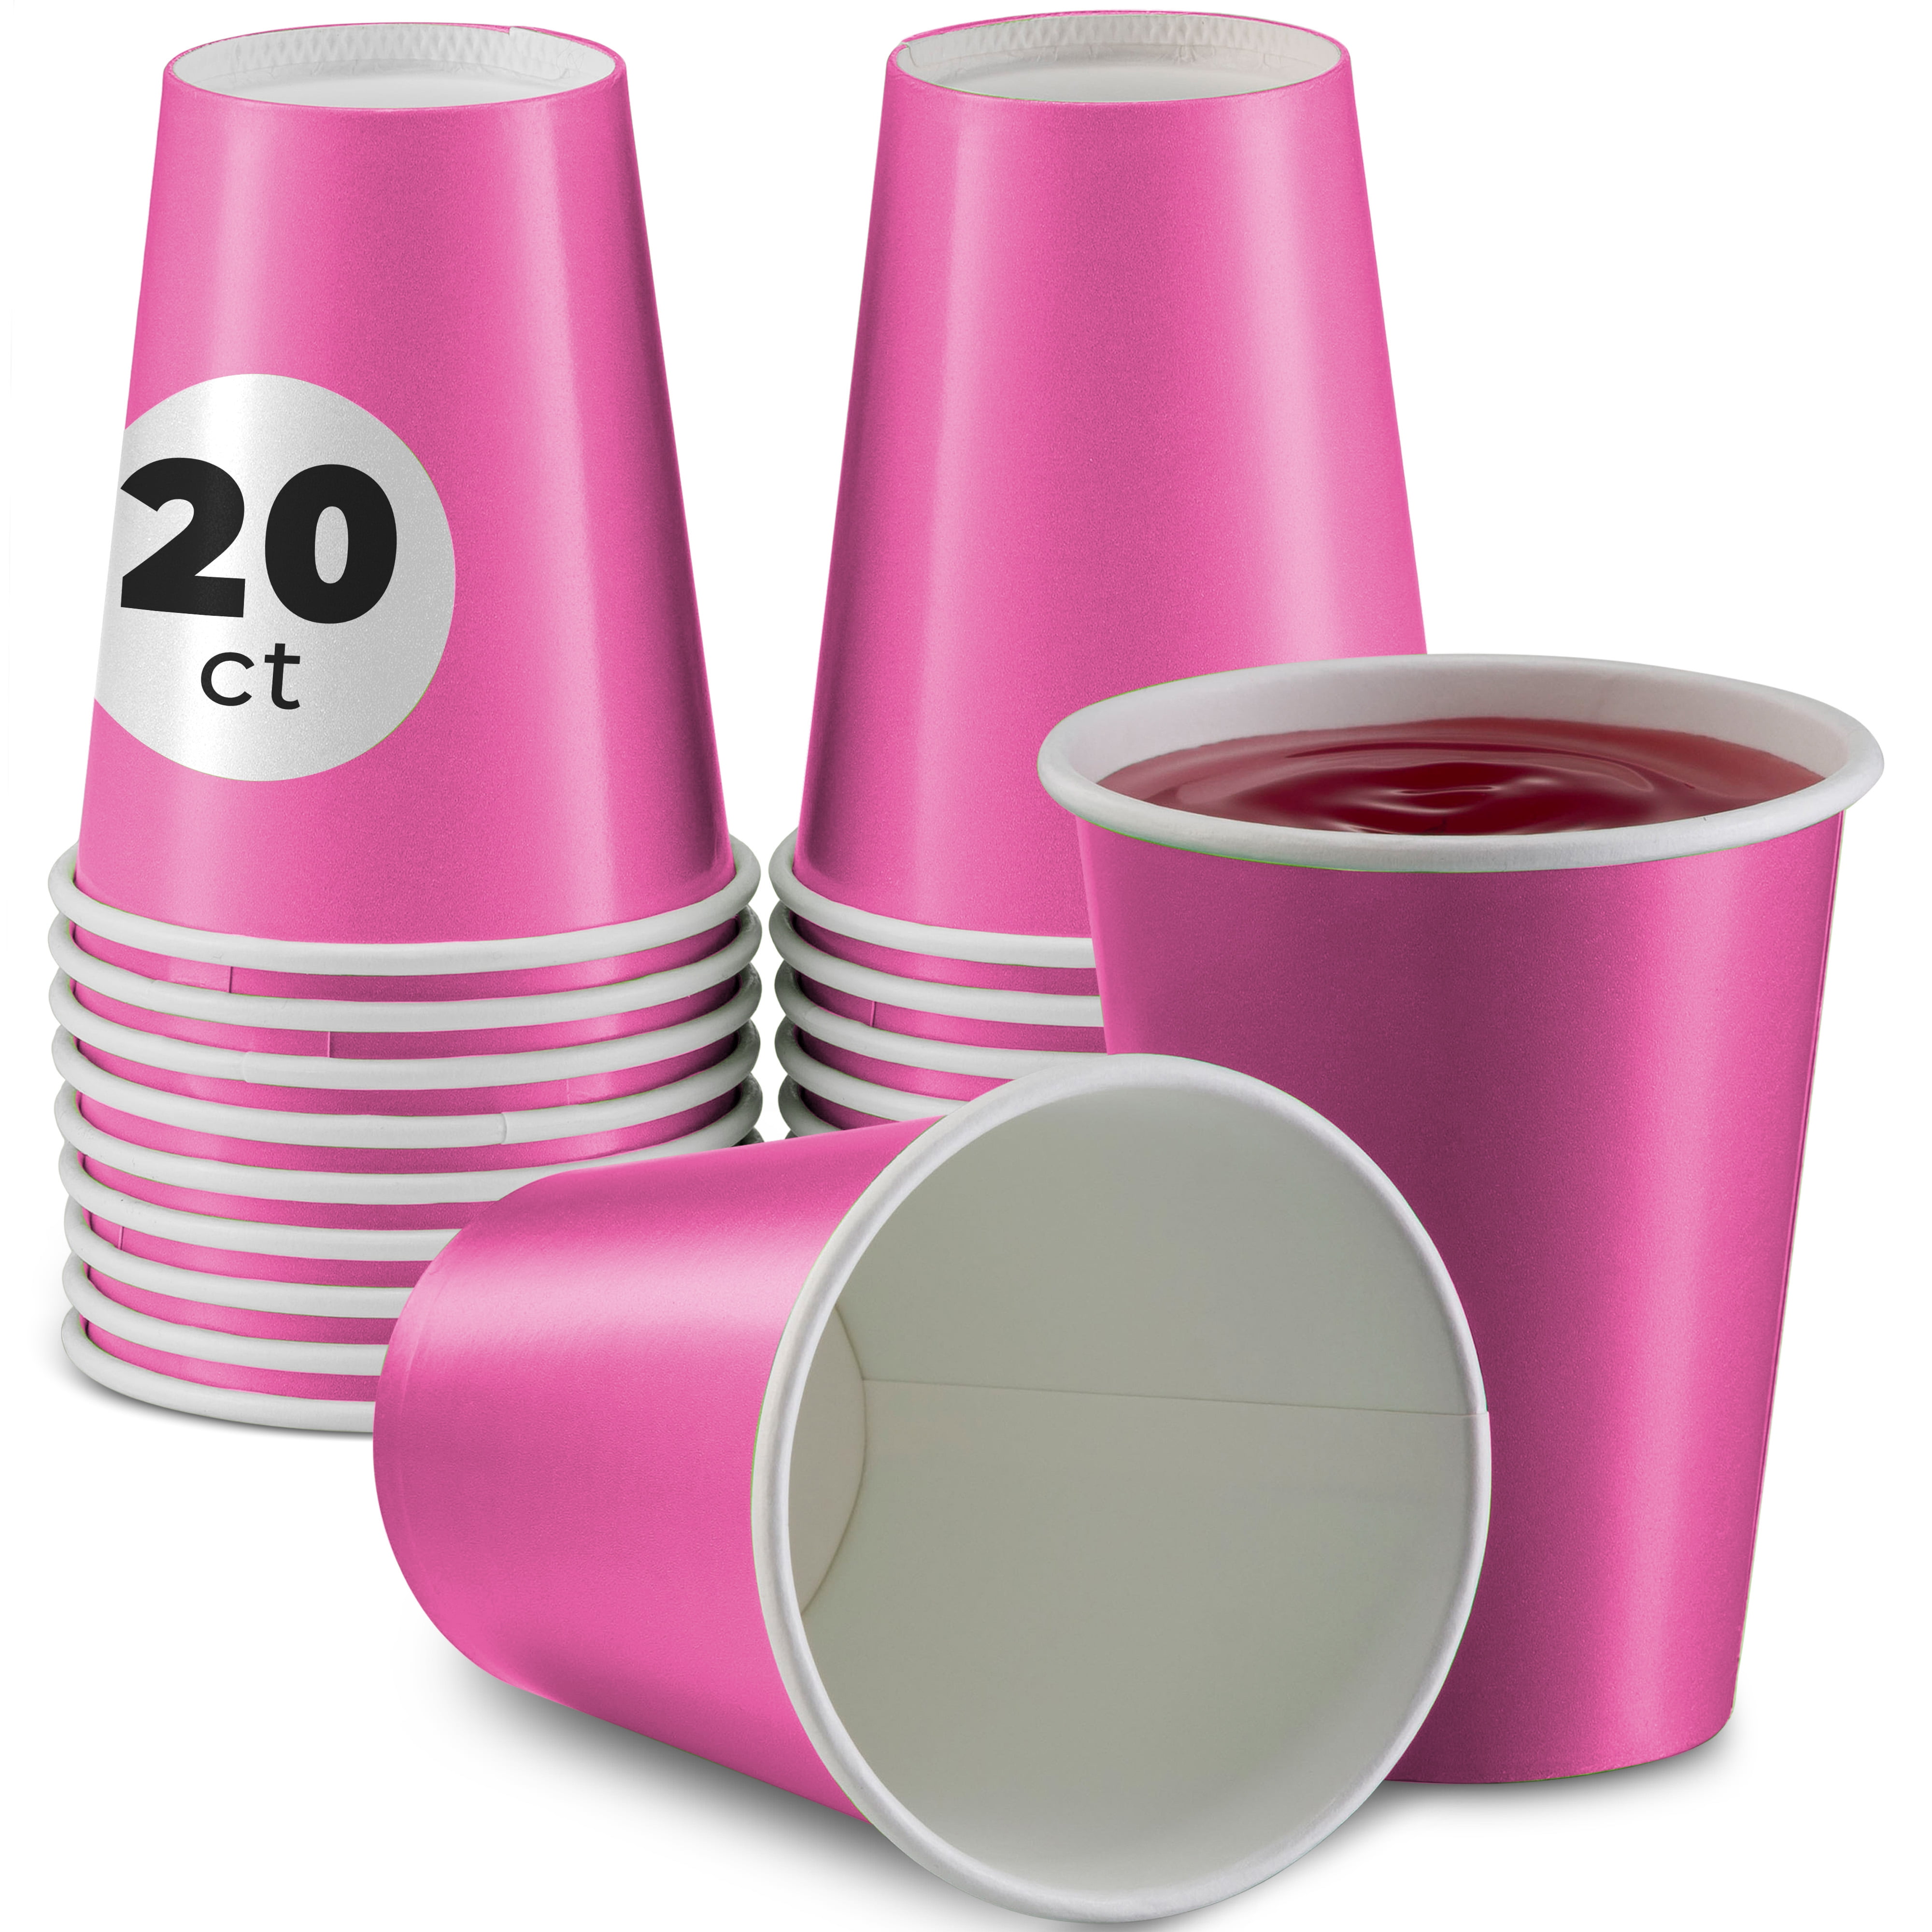 Hushee 100 Pcs Christmas Cups 9 oz Disposable Paper Cups Pink Elegant  Strong and Sturdy Christmas Co…See more Hushee 100 Pcs Christmas Cups 9 oz